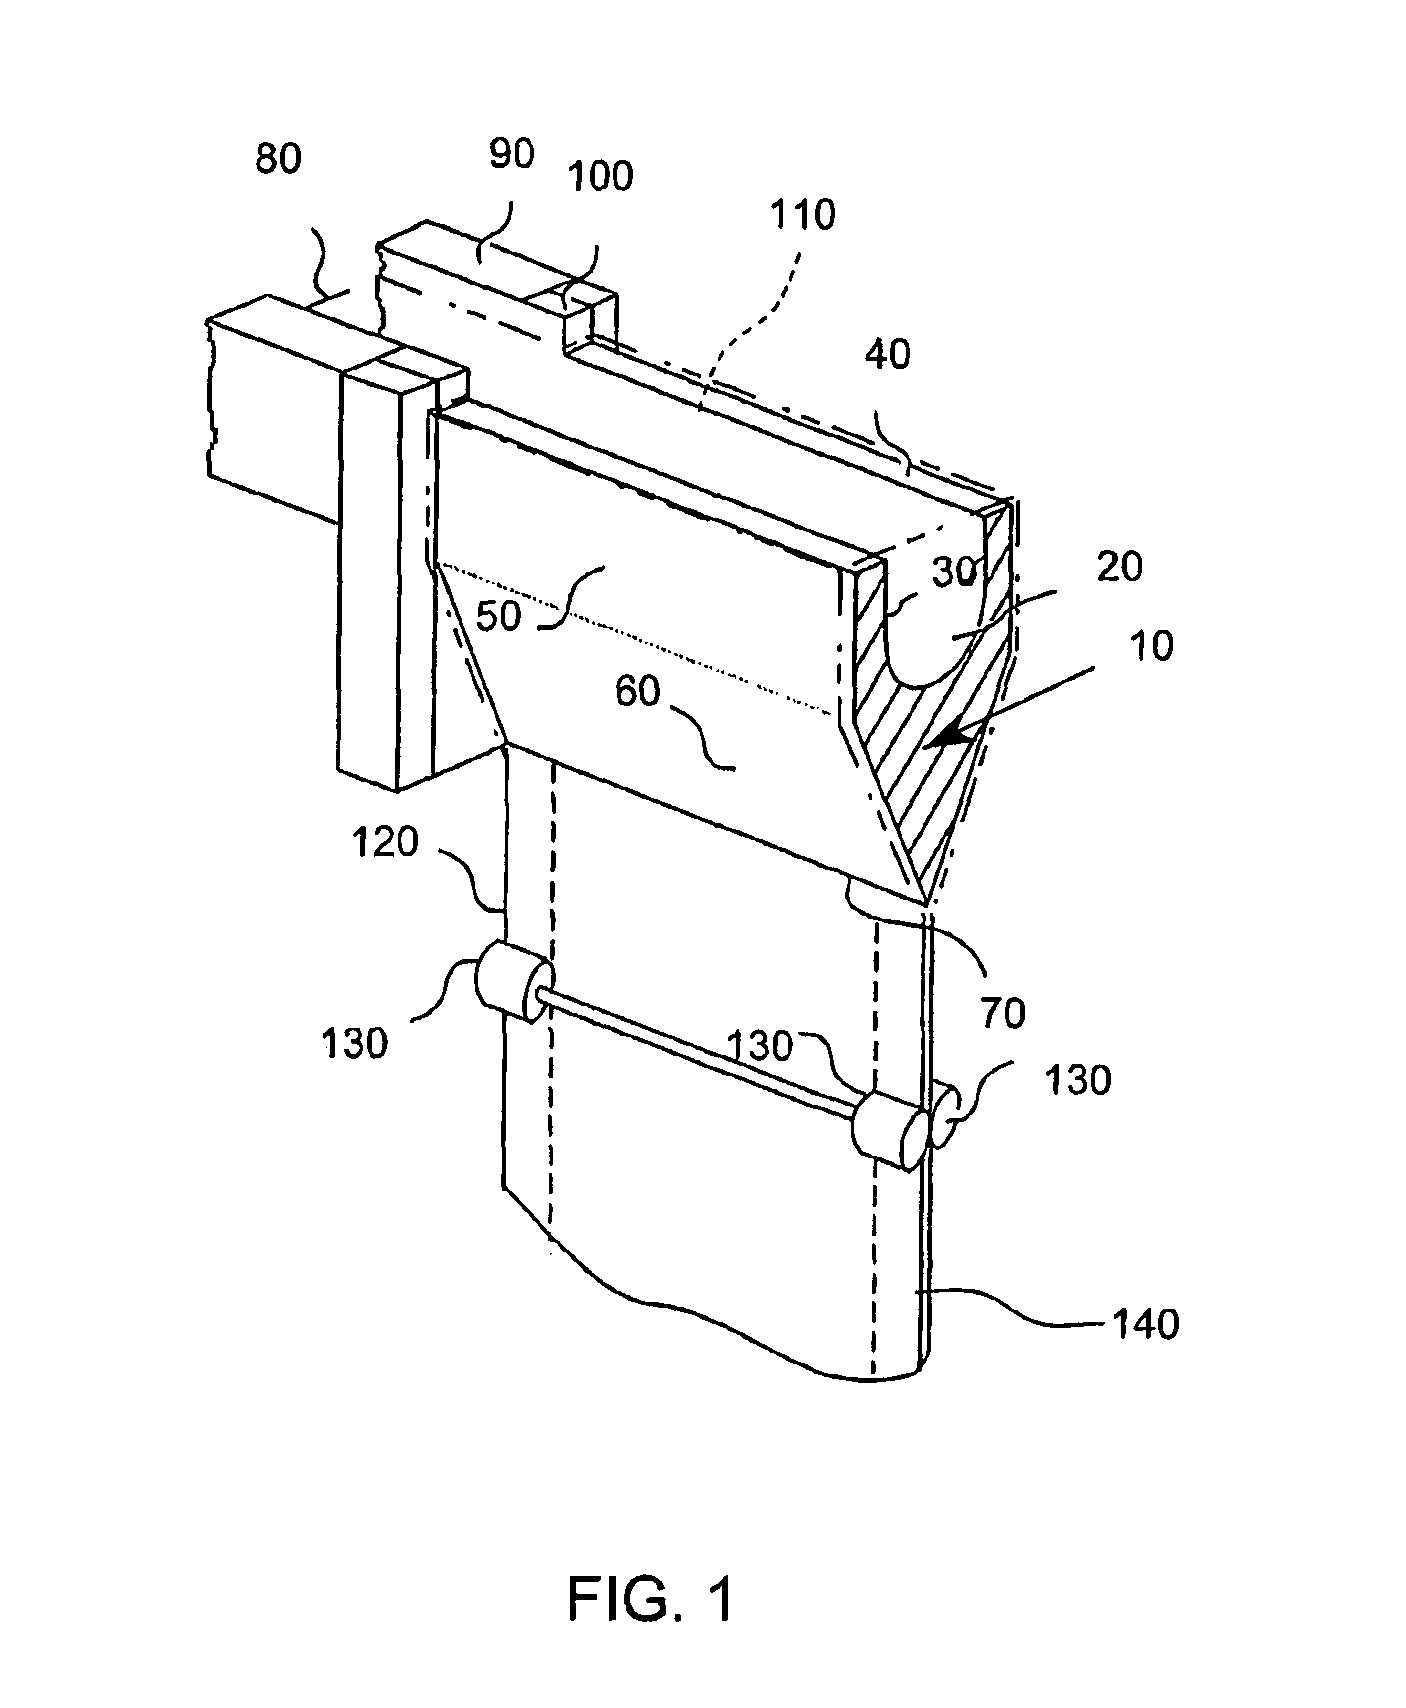 Method of making a glass sheet using controlled cooling